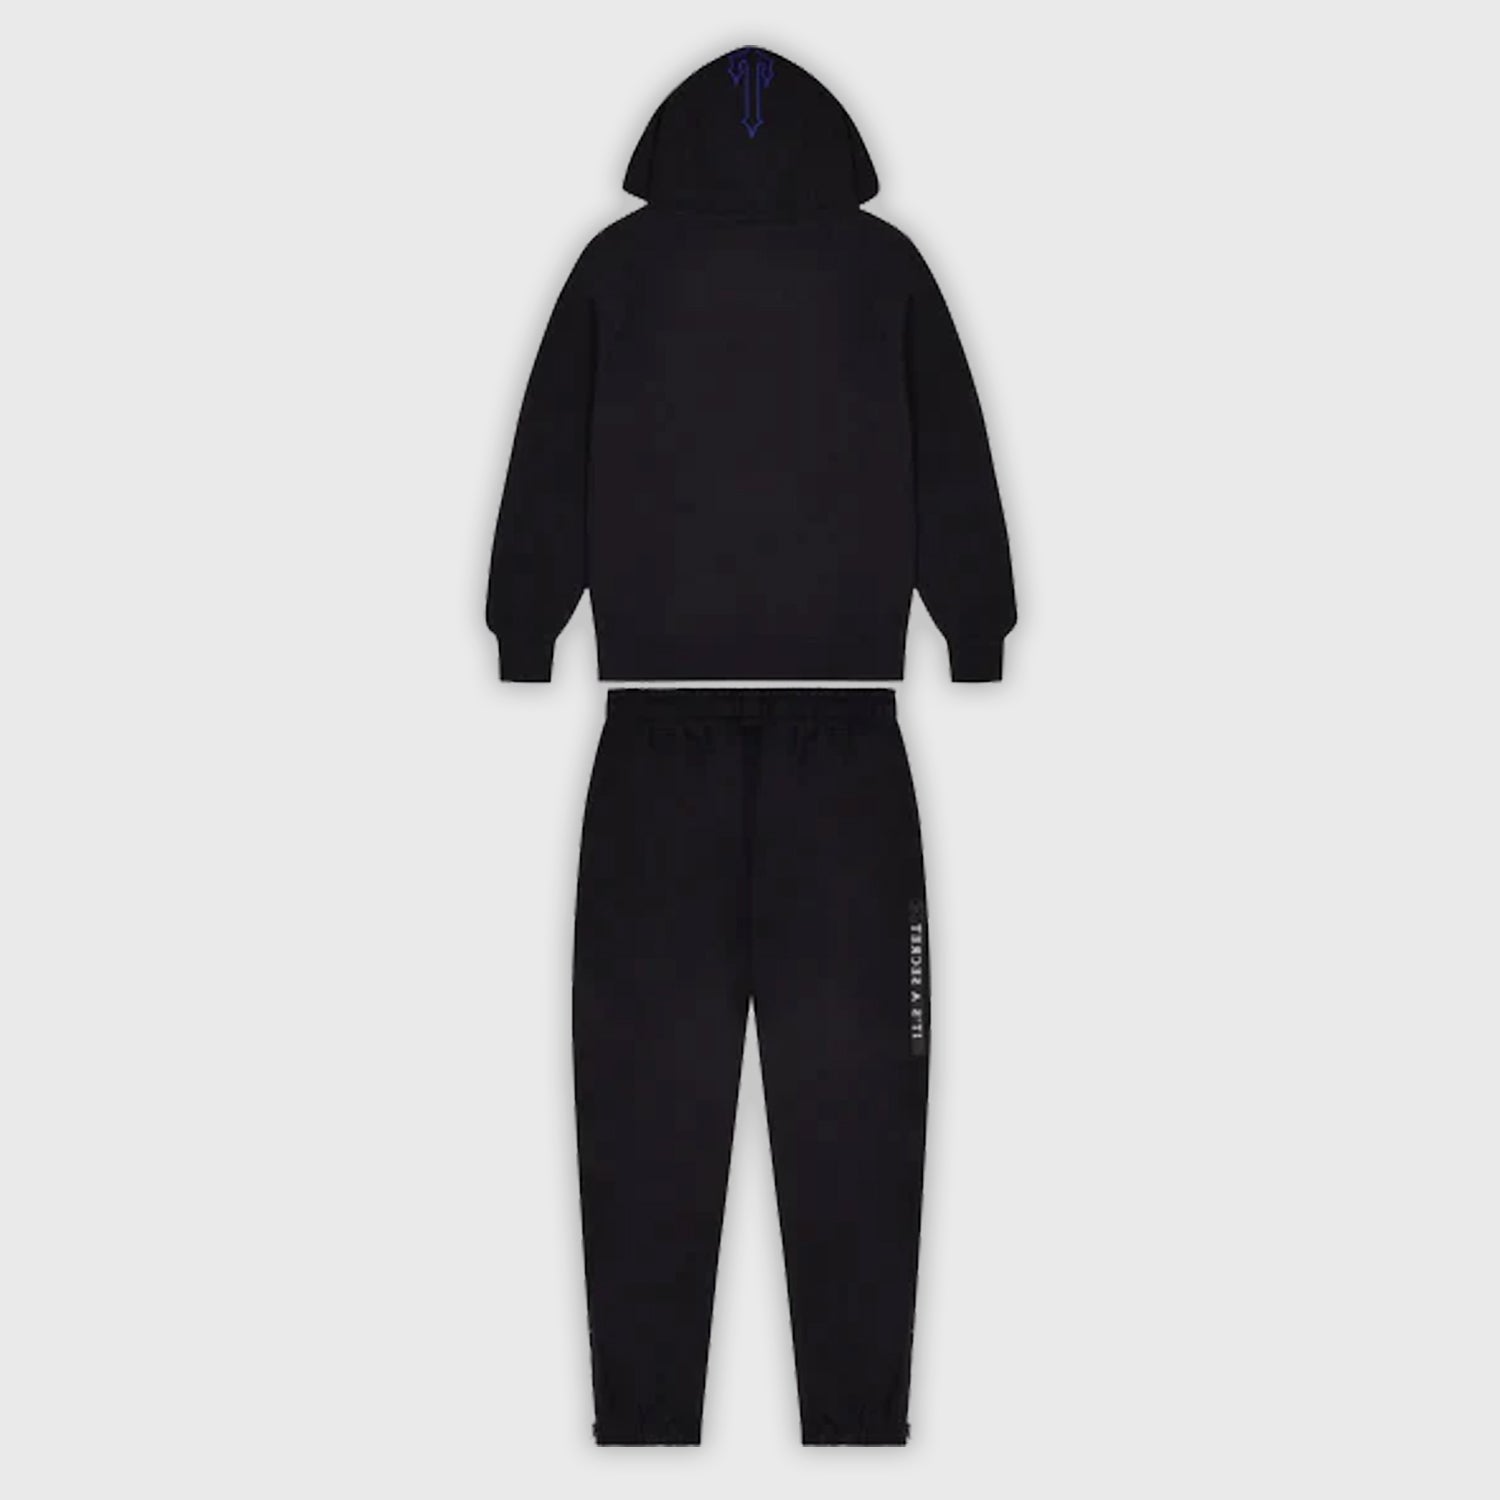 TRAPSTAR CHENILLE DECODED 2.0 HOODED TRACKSUIT 2.0 BLACK DAZZLING BLUE KICKKONNECT